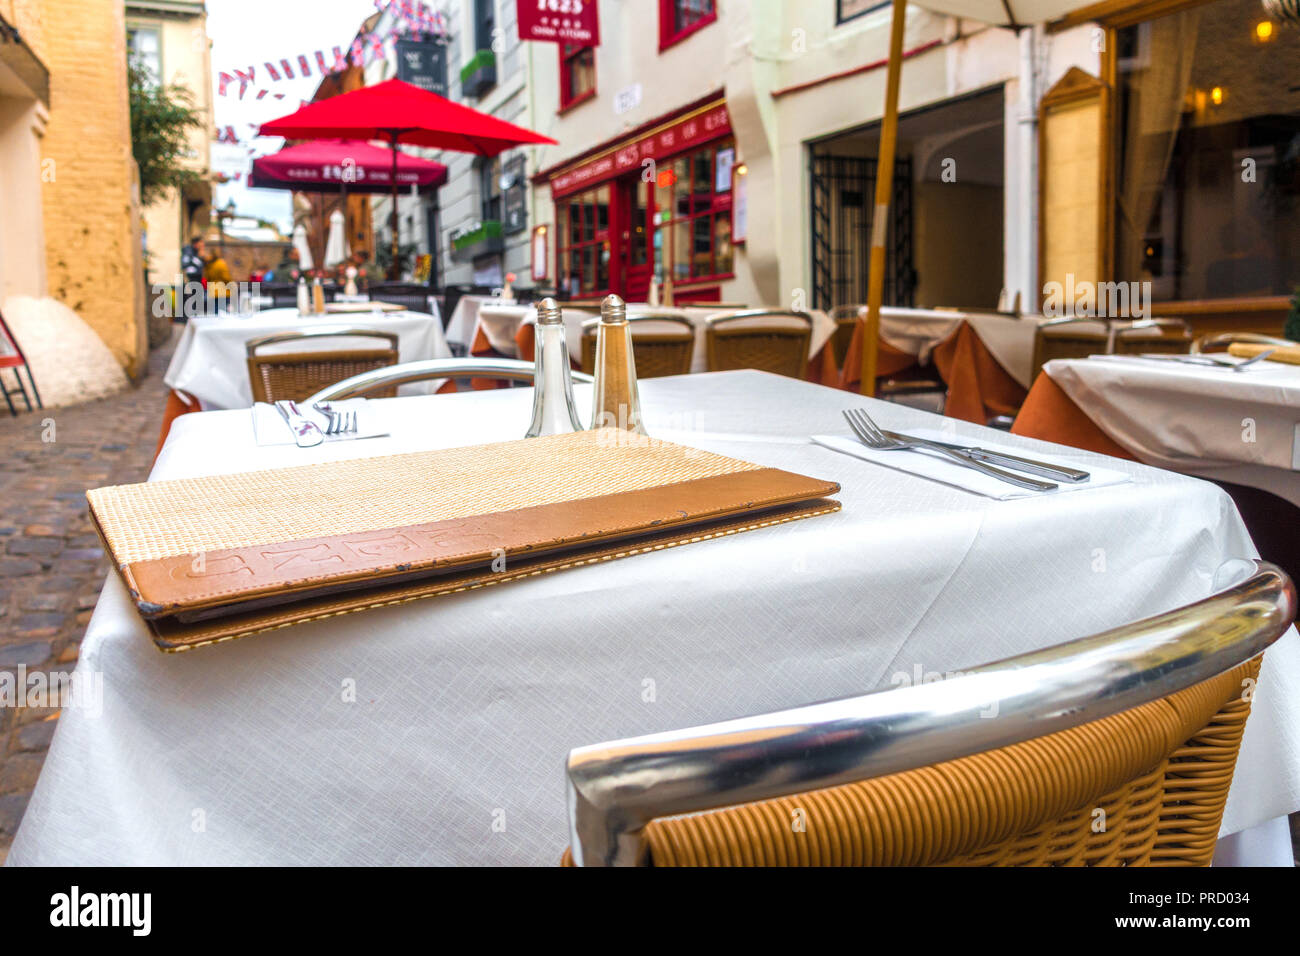 Outside tables laid out neatly with place settings at a restaurant in Church Lane, Windsor, UK. Stock Photo